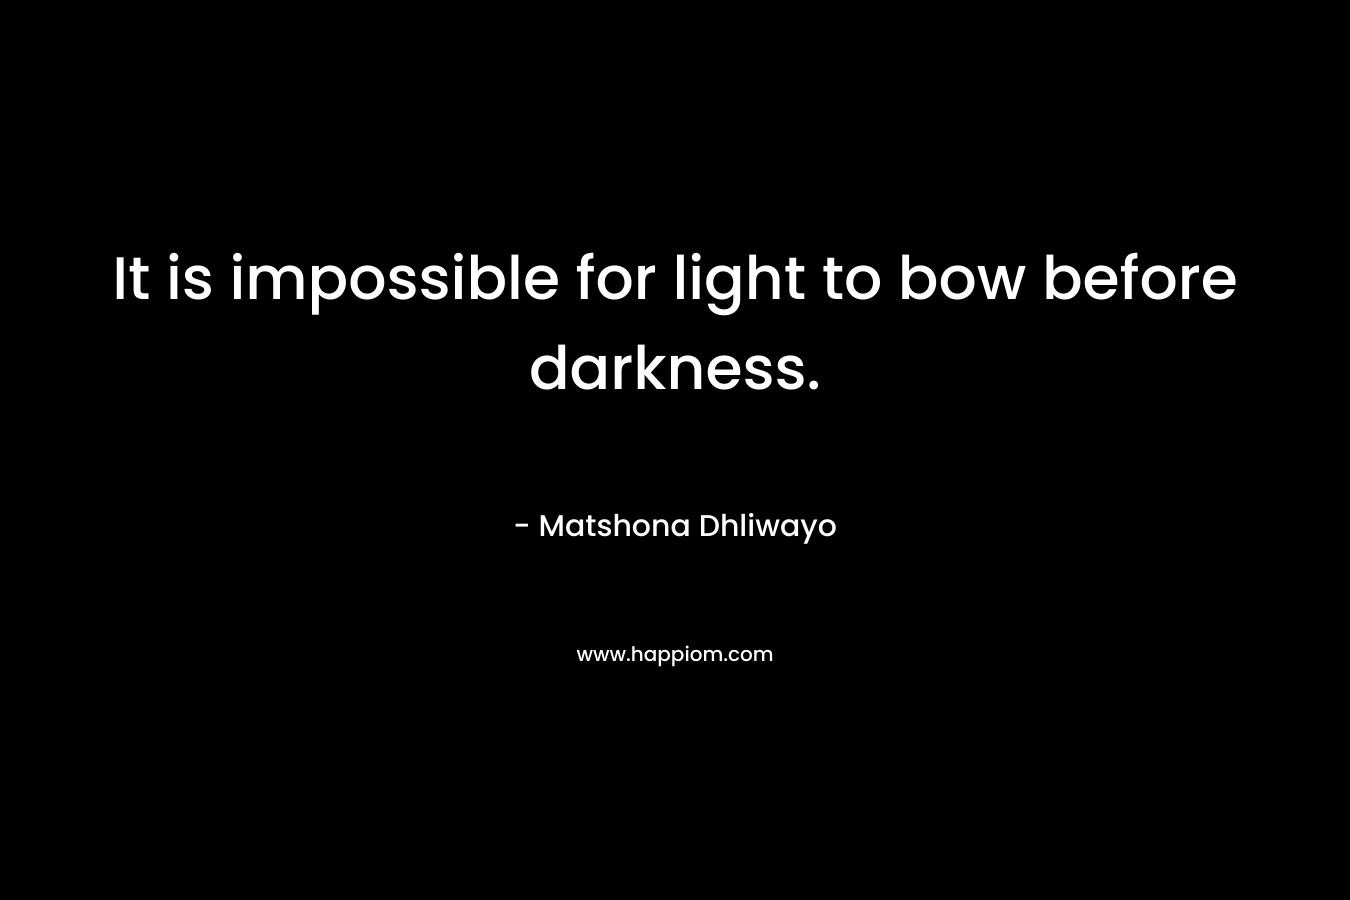 It is impossible for light to bow before darkness.